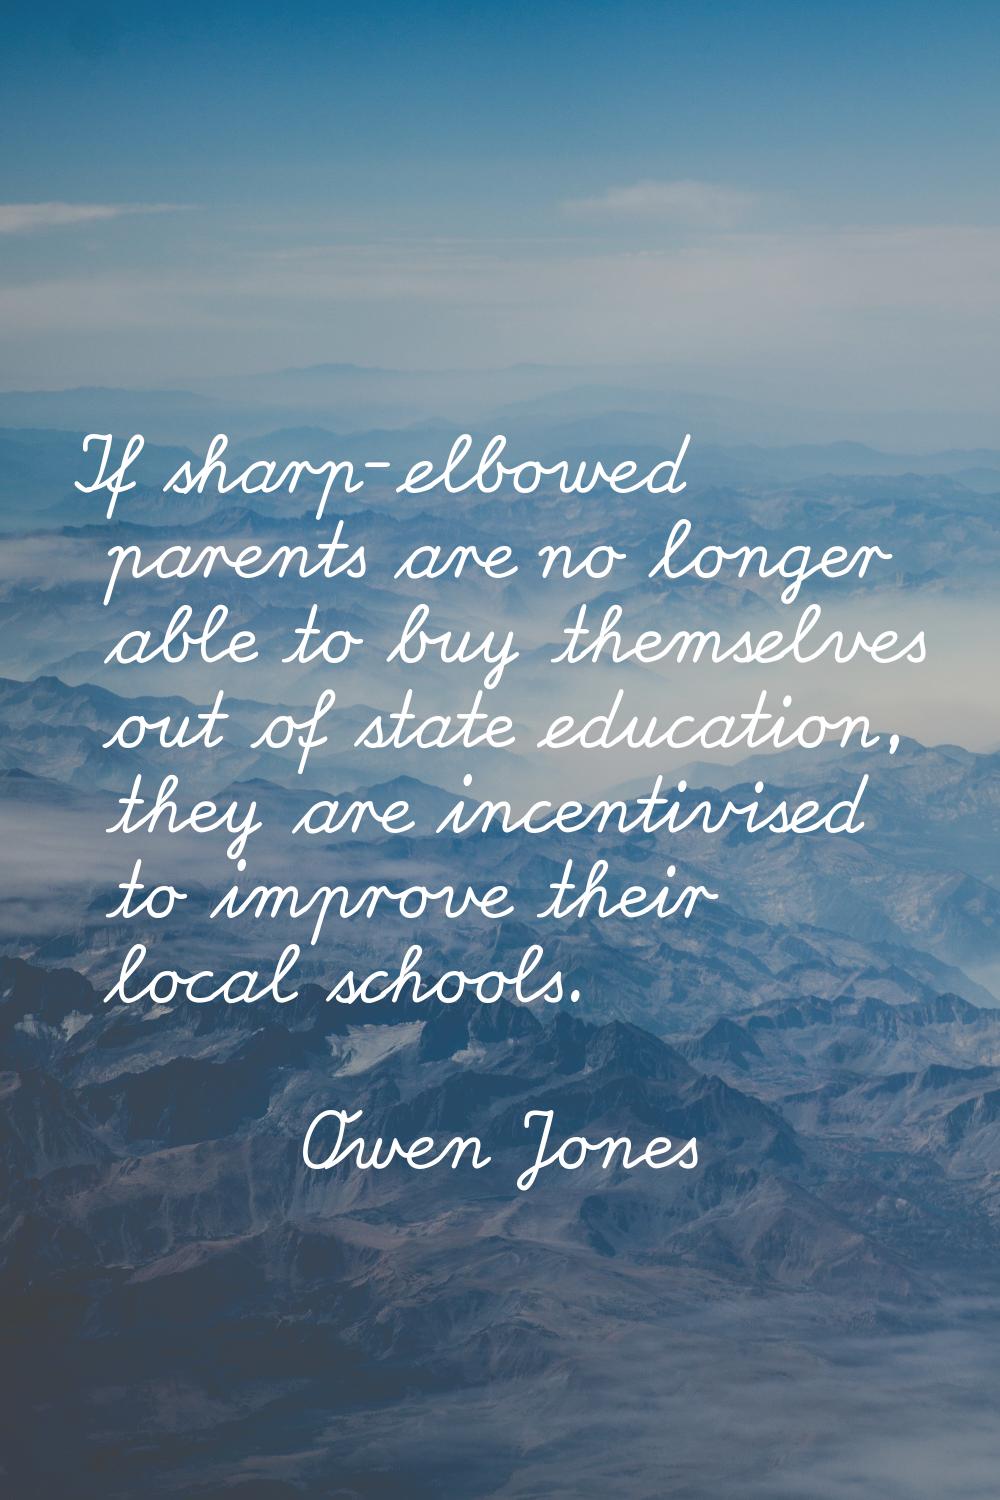 If sharp-elbowed parents are no longer able to buy themselves out of state education, they are ince